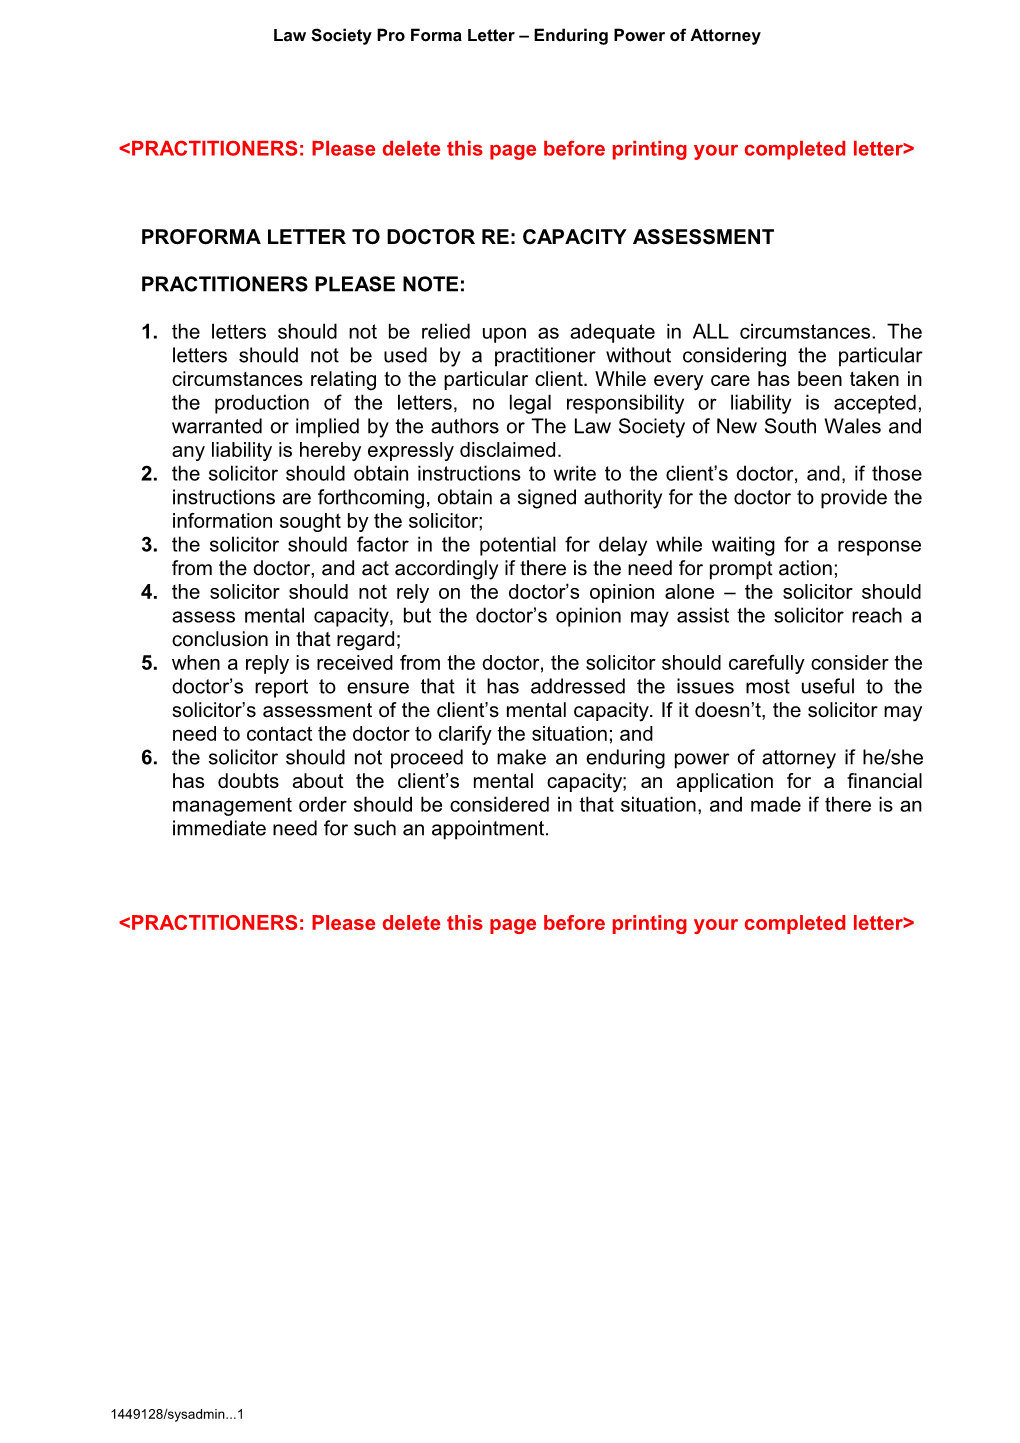 Law Society Pro Forma Letter Enduring Power of Attorney